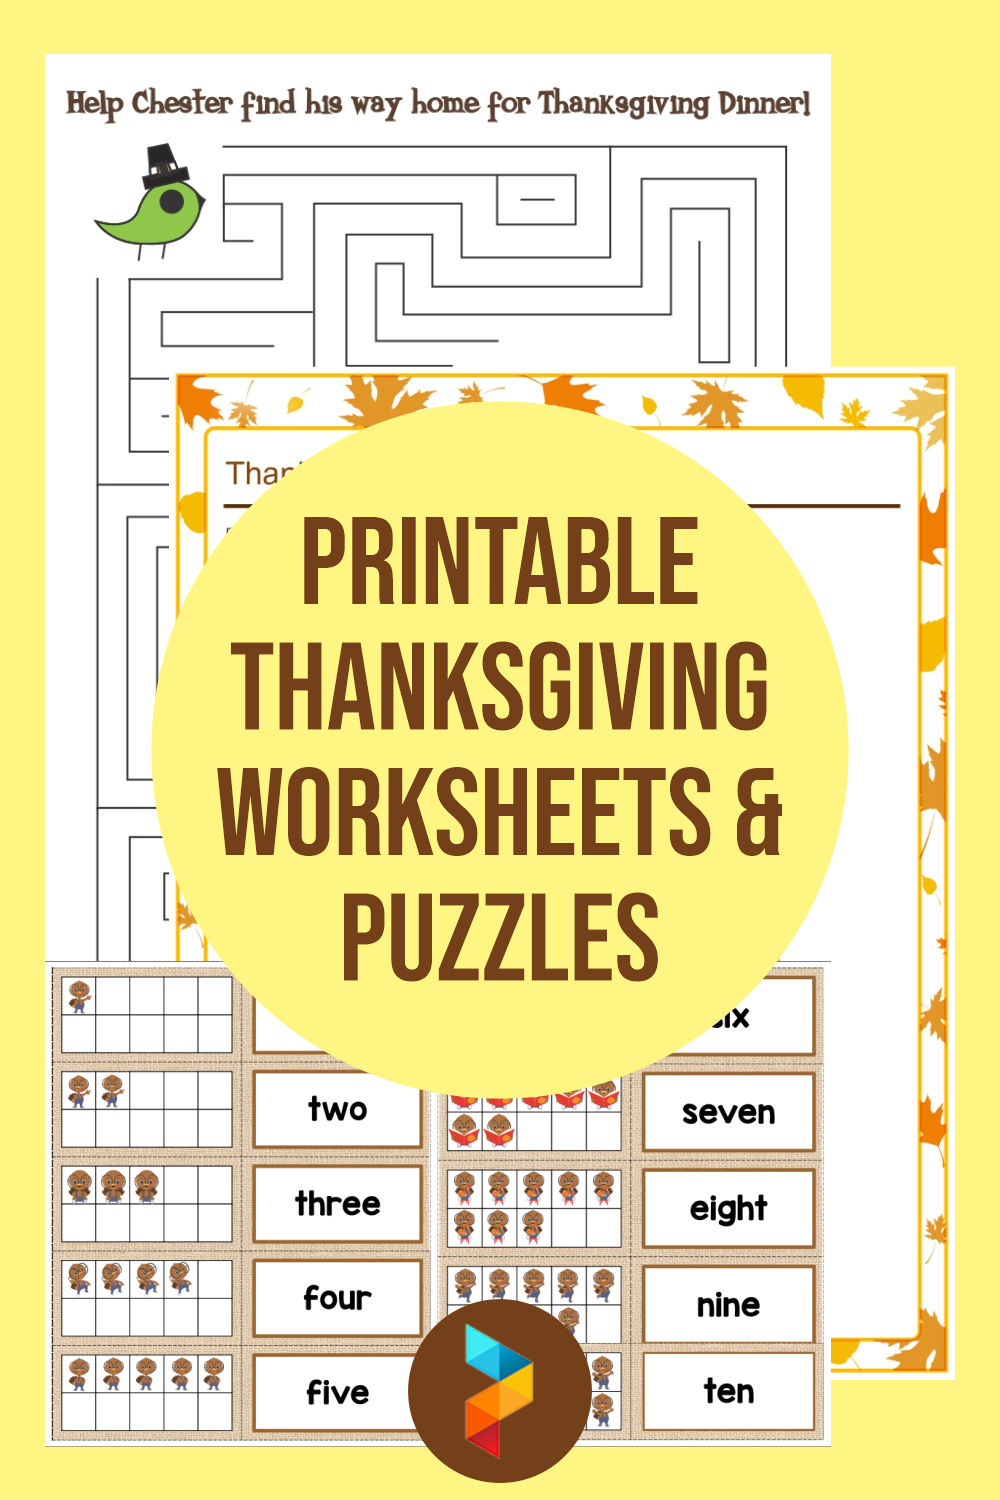 Printable Thanksgiving Worksheets & Puzzles